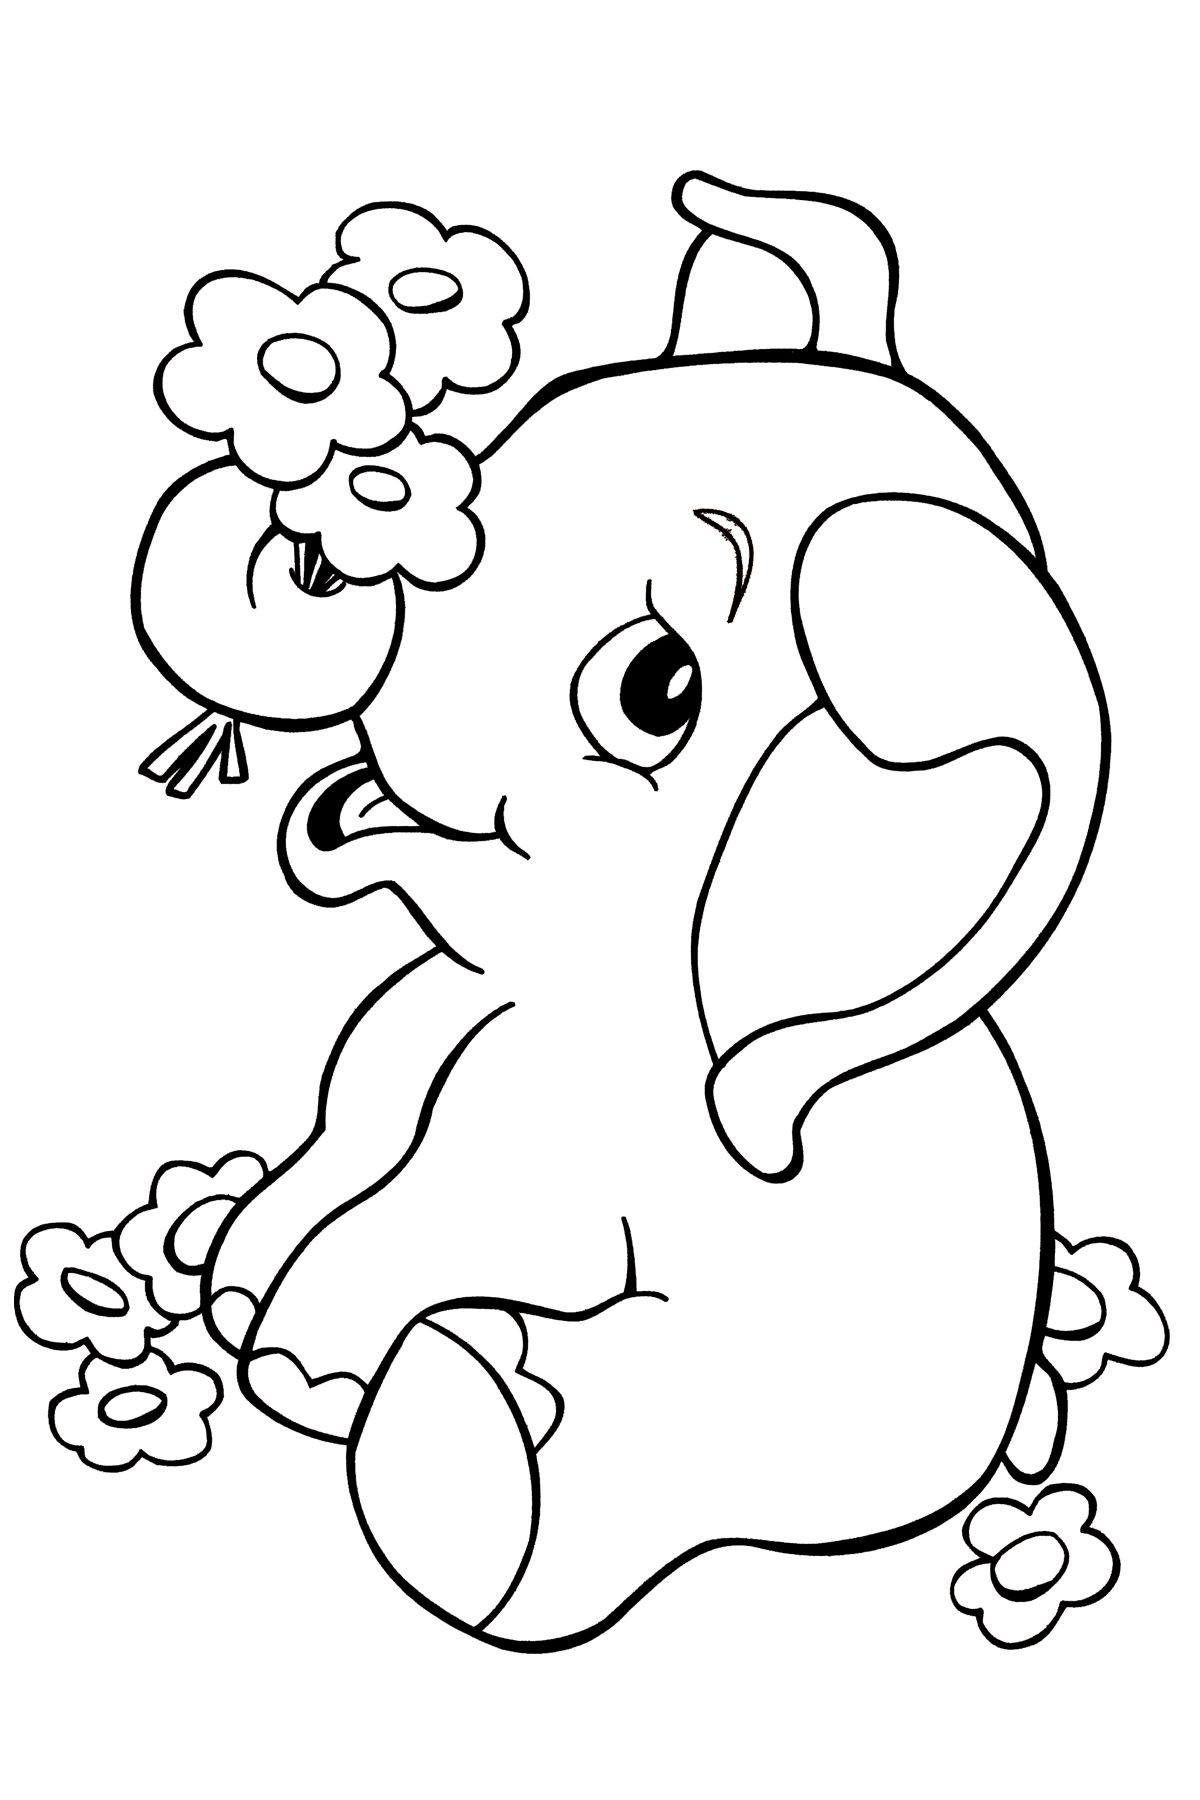 Animal Coloring Pages For Kids
 Jungle Coloring Pages Best Coloring Pages For Kids